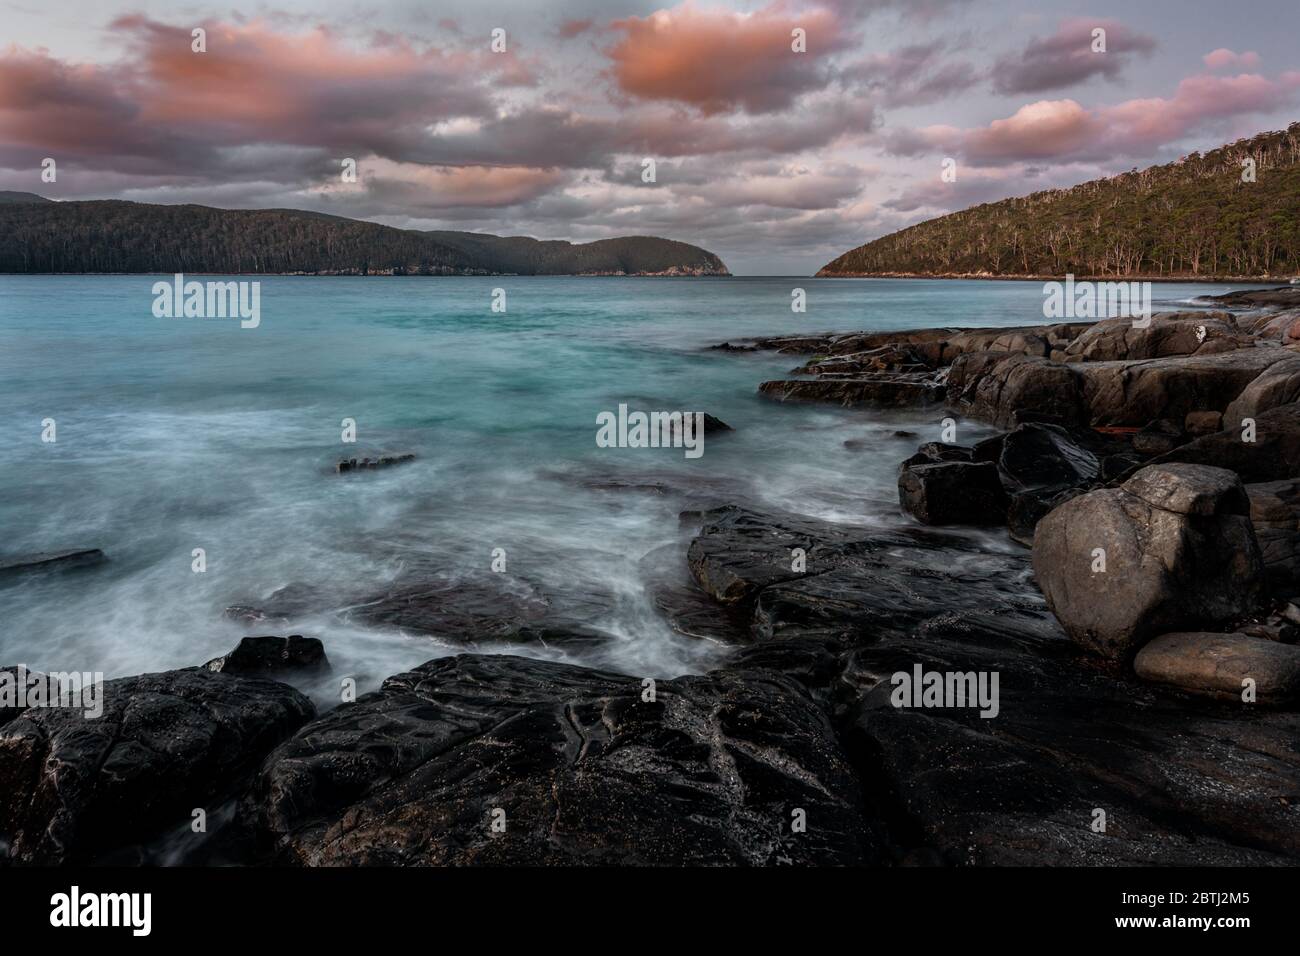 Colourful mood at Fortescue Bay in Tasman National Park. Stock Photo